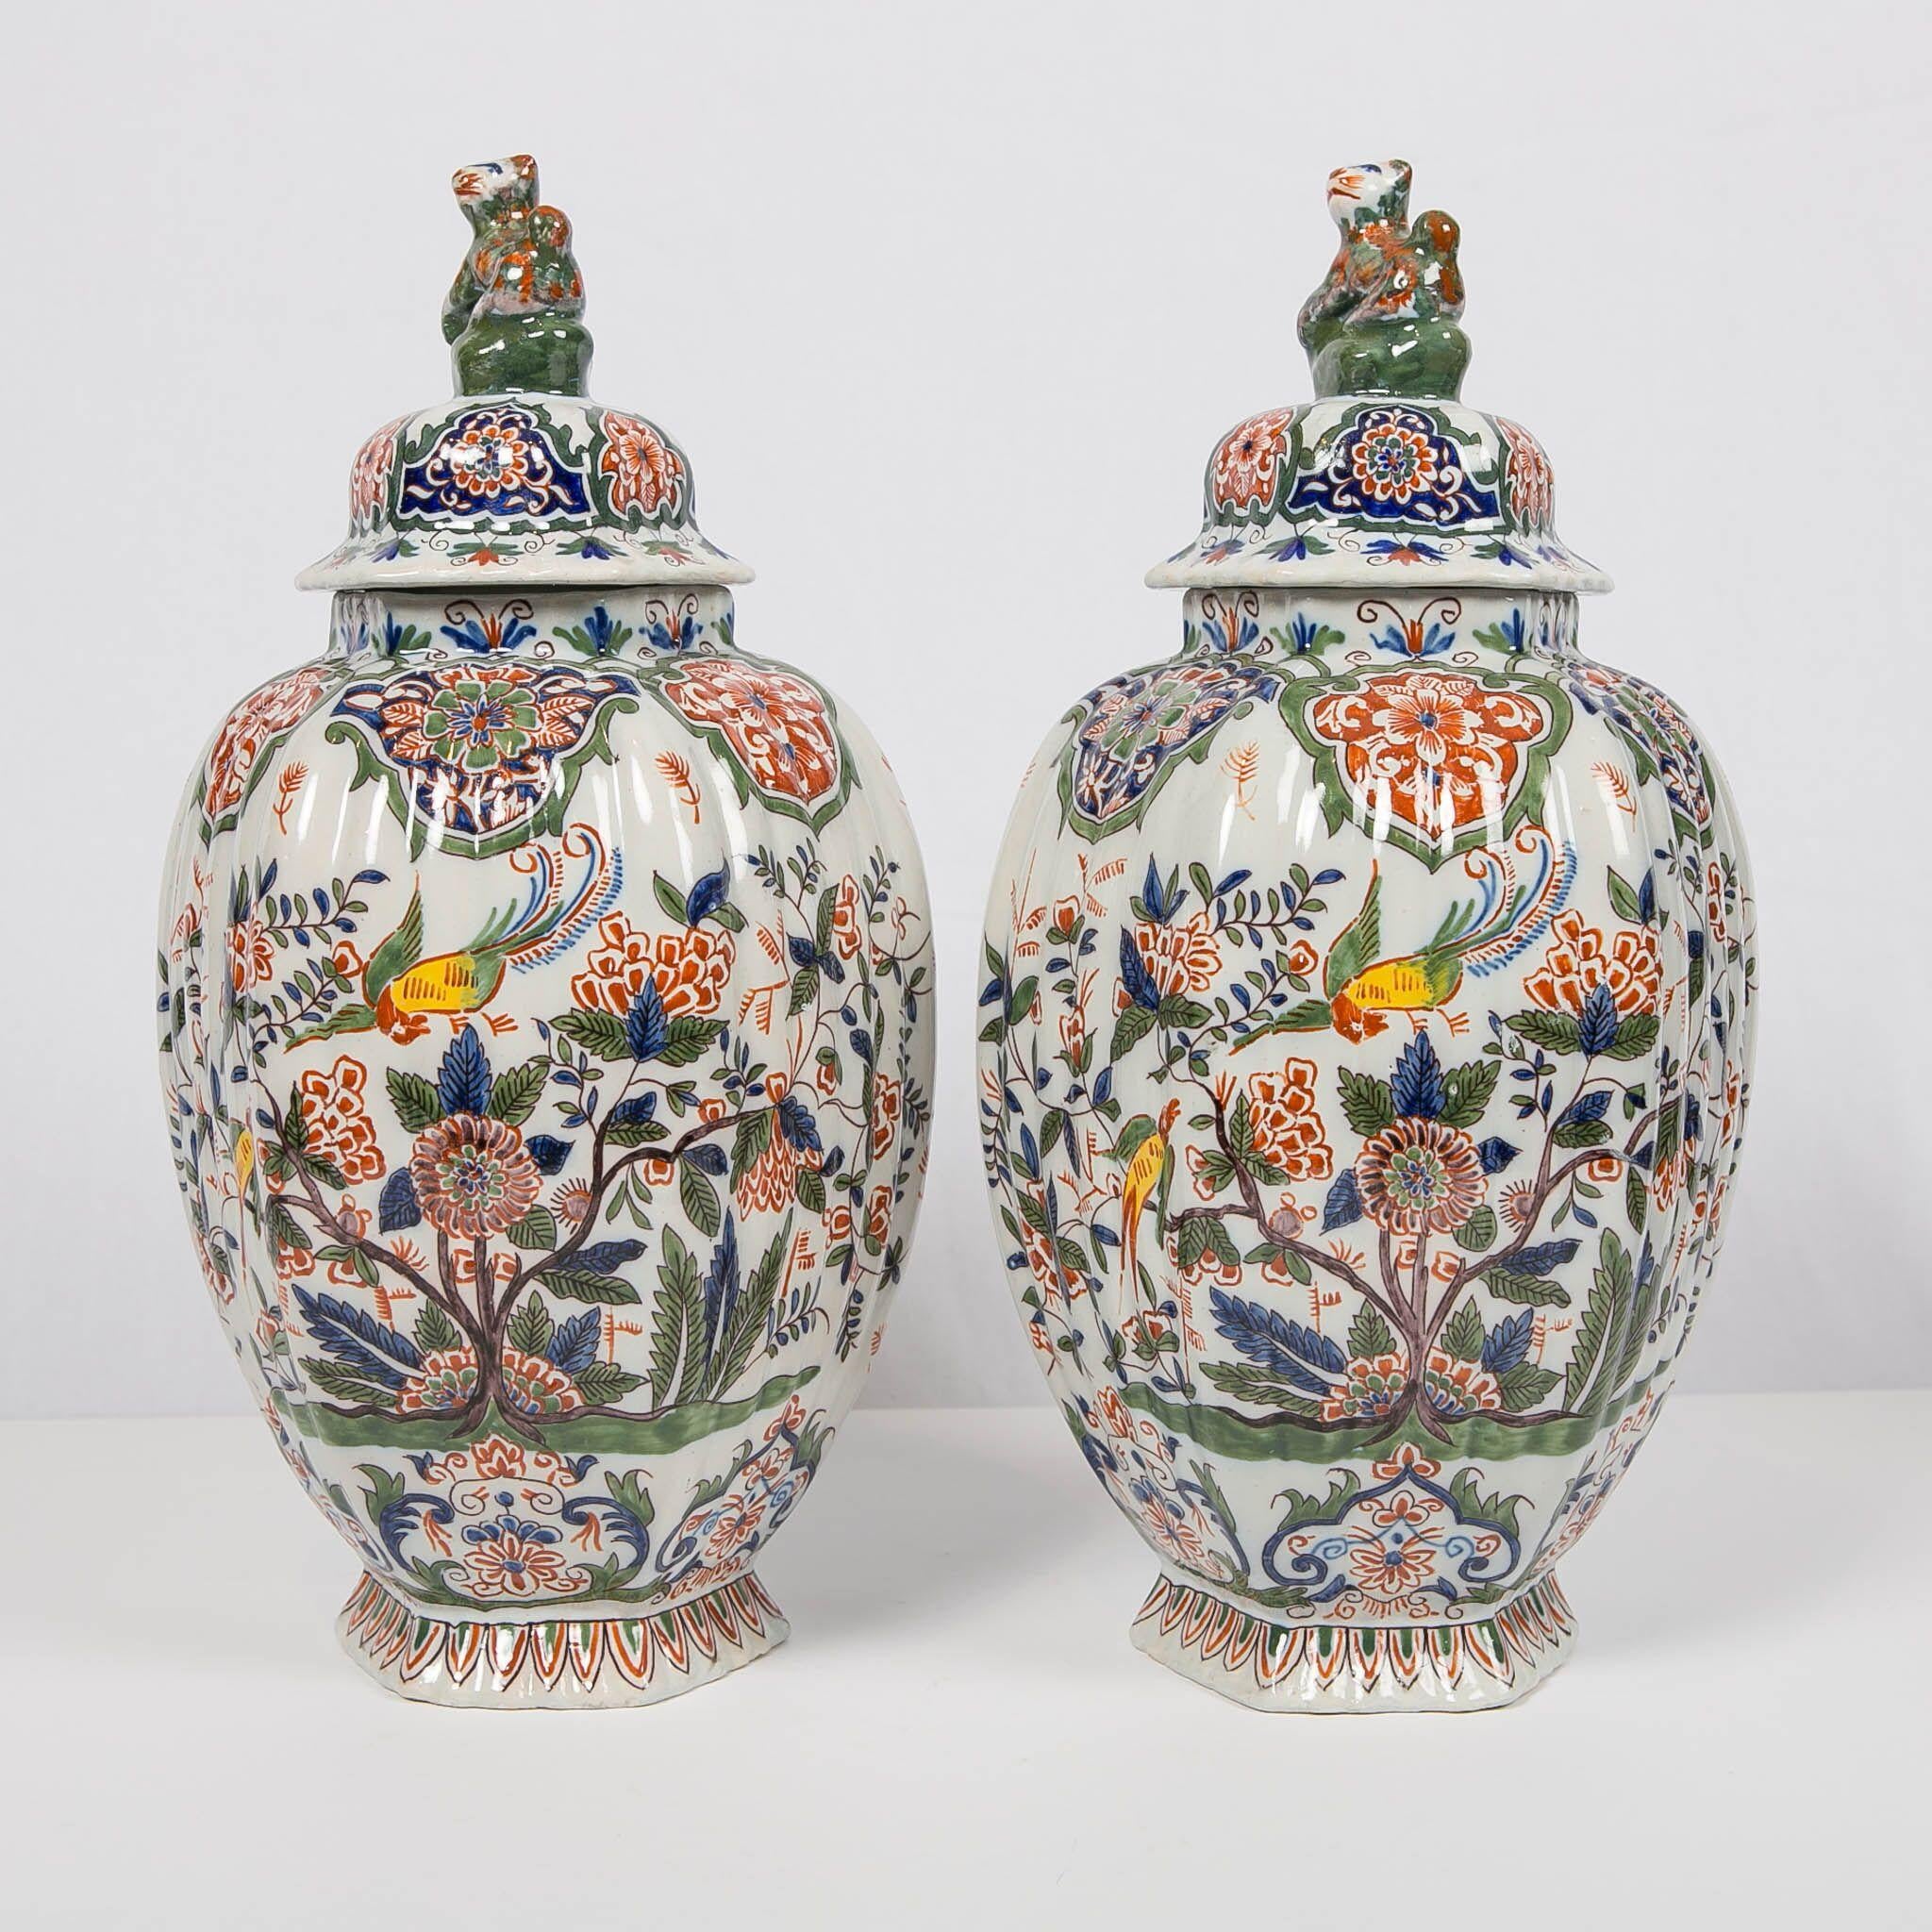 We are pleased to present this lovely pair of Dutch delft polychrome covered jars. They are painted in the cashmere palette of iron-red, moss green, and cobalt blue, with accents of bright yellow. The form of the jars is octagonal, and the surface